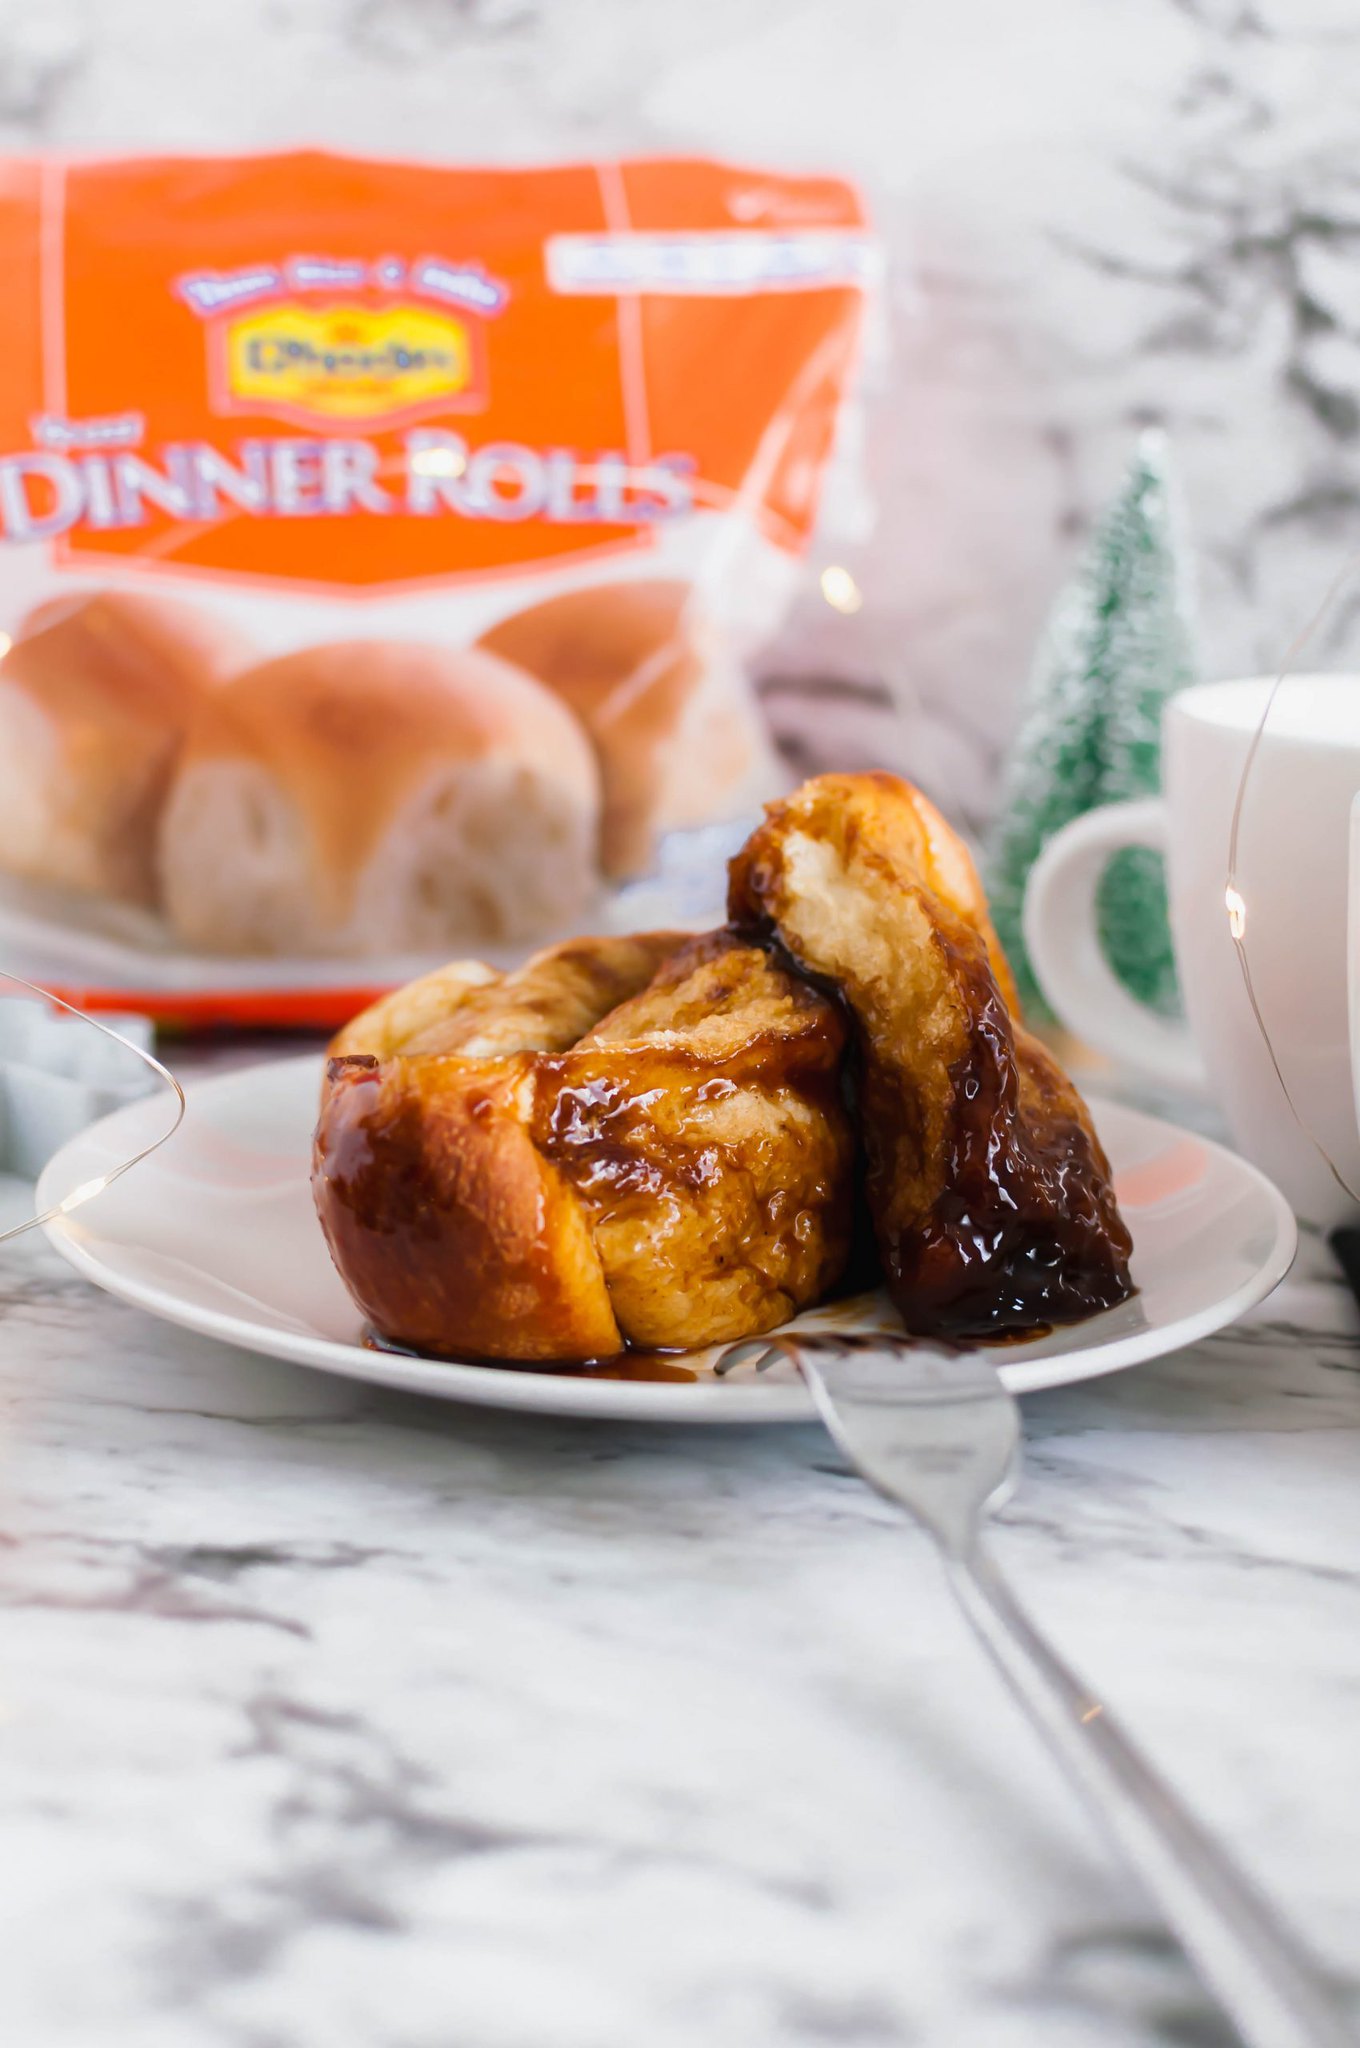 The perfect Christmas morning breakfast, Gingerbread Monkey Bread. Make it the night before and bake in the morning. Filled with warm gingerbread spices.